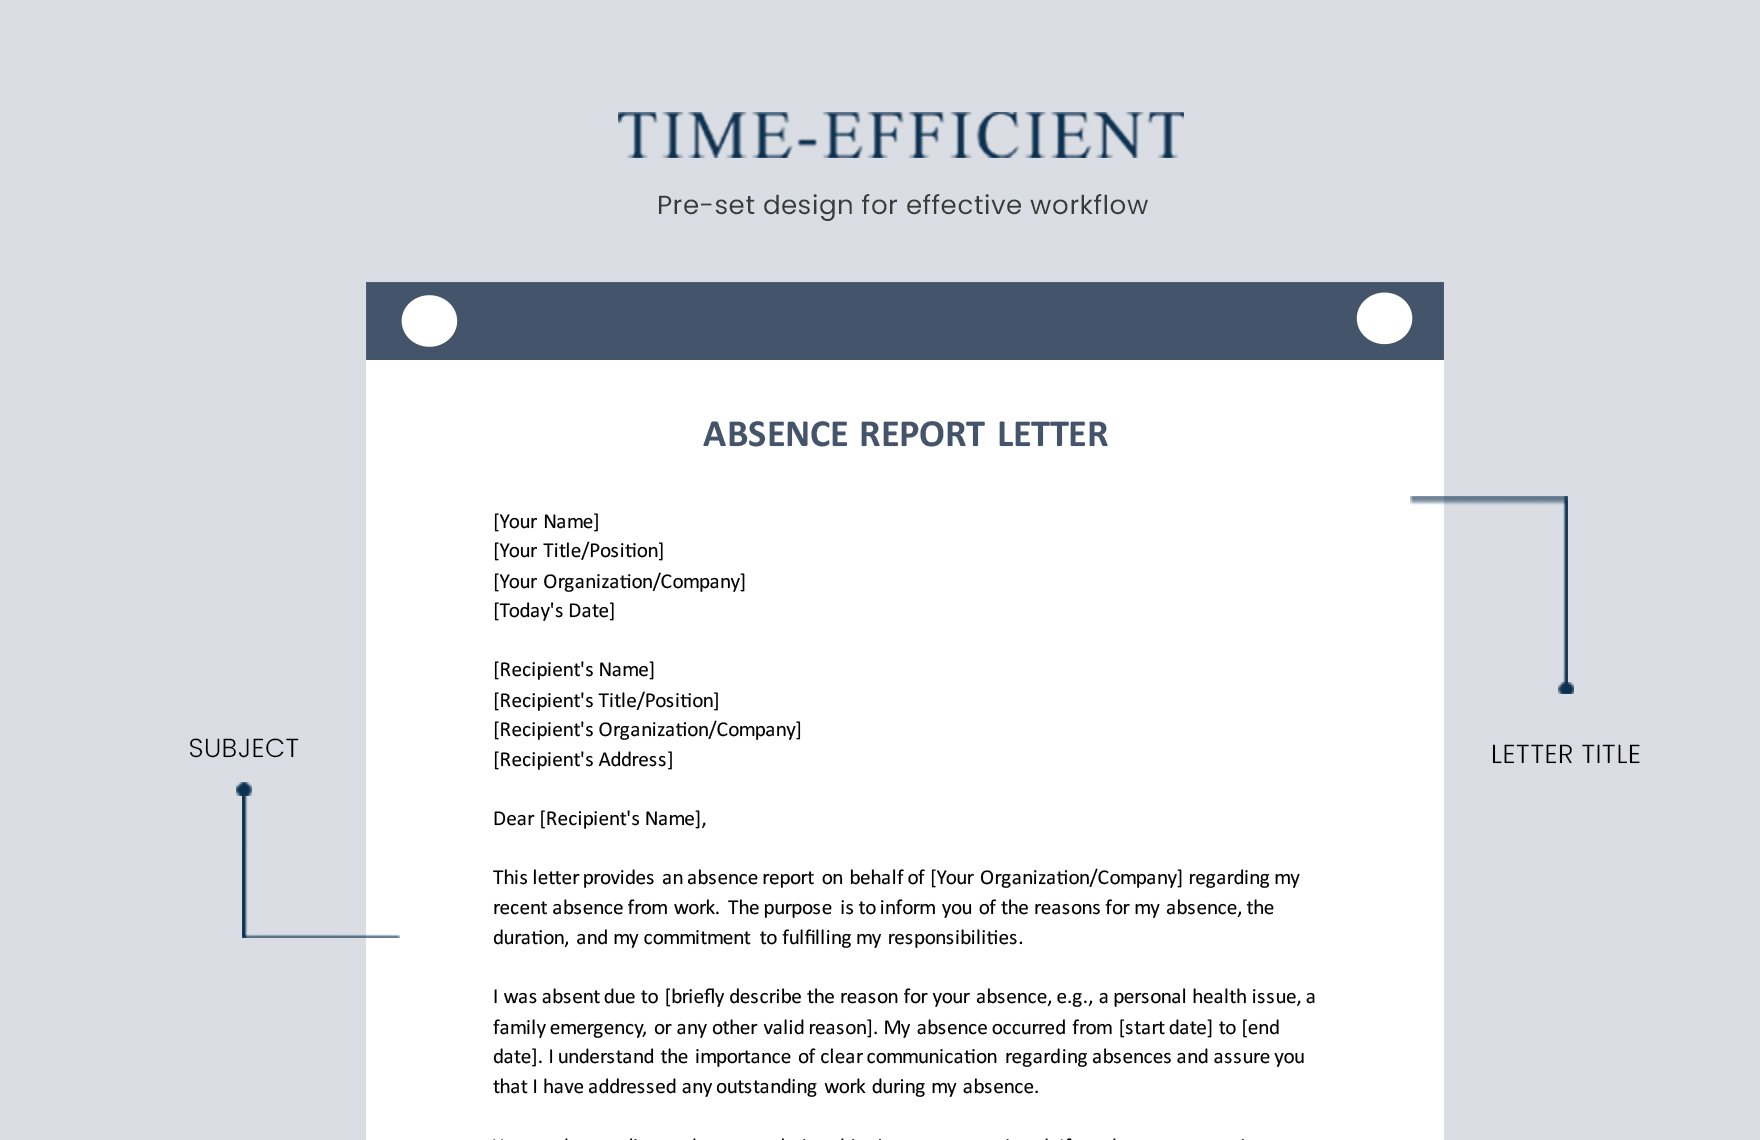 Absence Report Letter